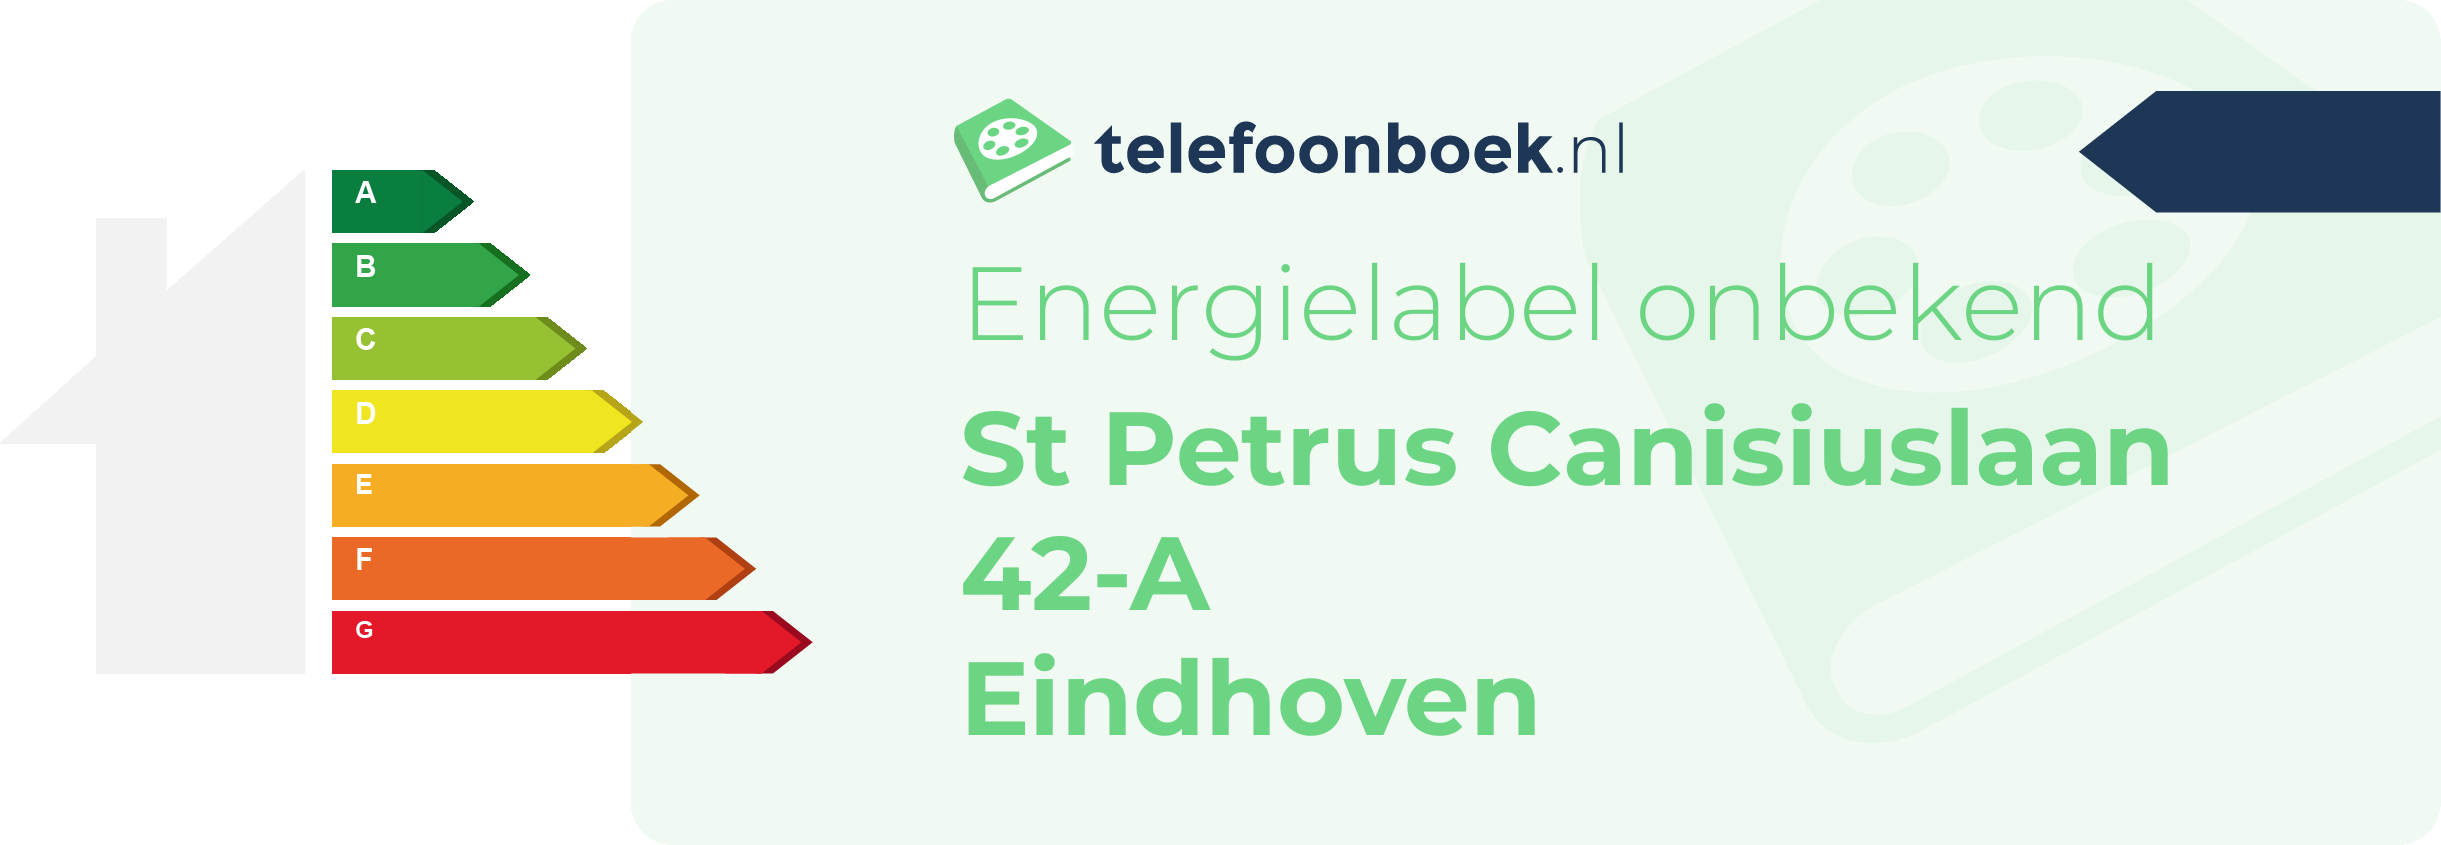 Energielabel St Petrus Canisiuslaan 42-A Eindhoven